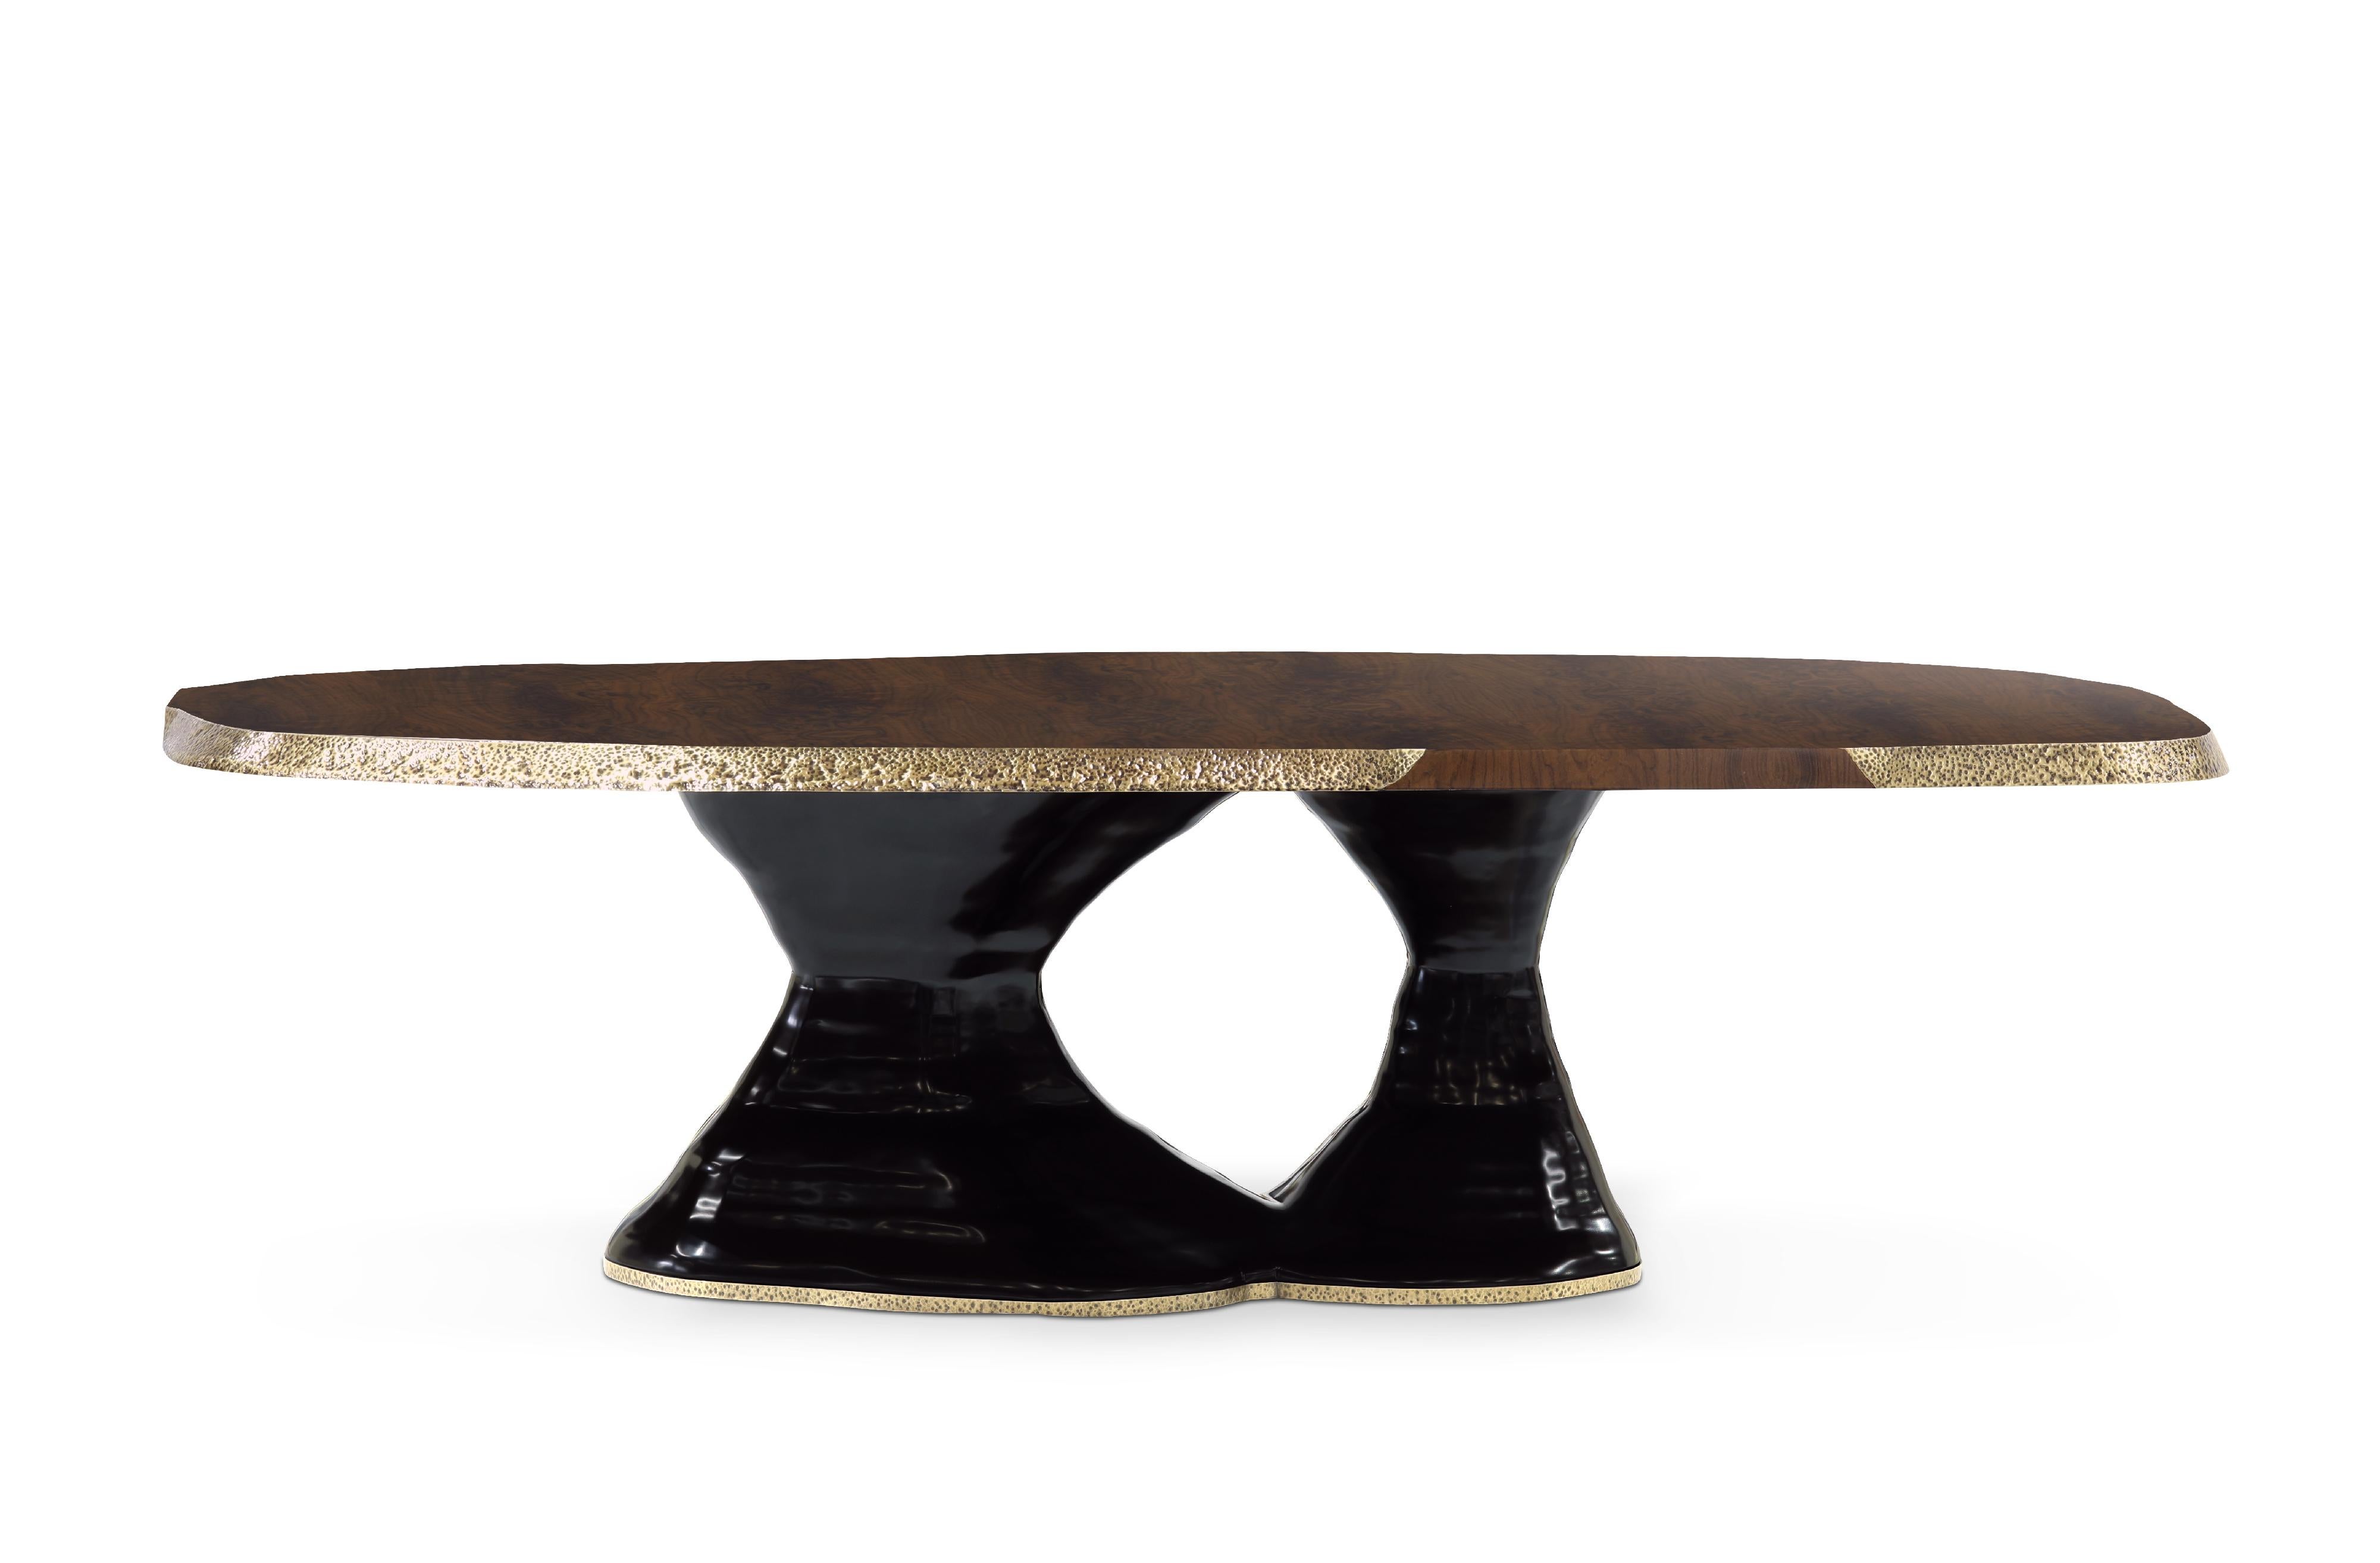 Monument Valley, in Arizona, is one of the greatest icons of the American West landscape. It inspired the creation of Plateau dining table. It features a top in walnut root veneer with a matte varnish & details in matte hammered brushed aged brass,